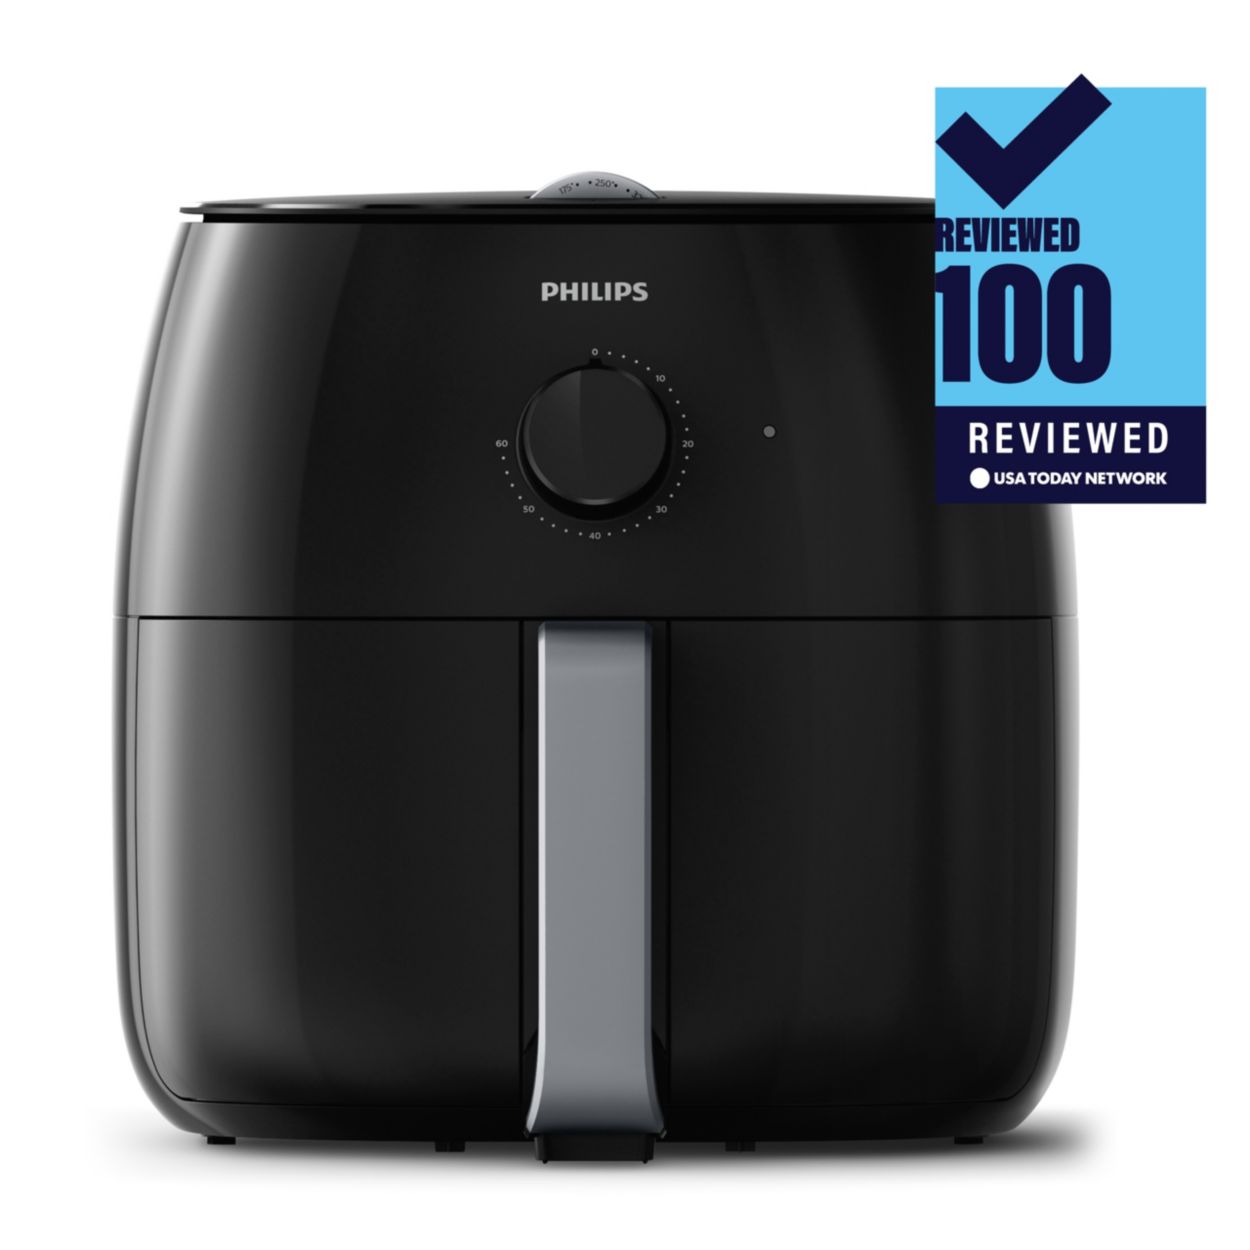 https://images.philips.com/is/image/philipsconsumer/aa4bafd49cd44fcd9f3cad1300ef2480?$jpglarge$&wid=1250